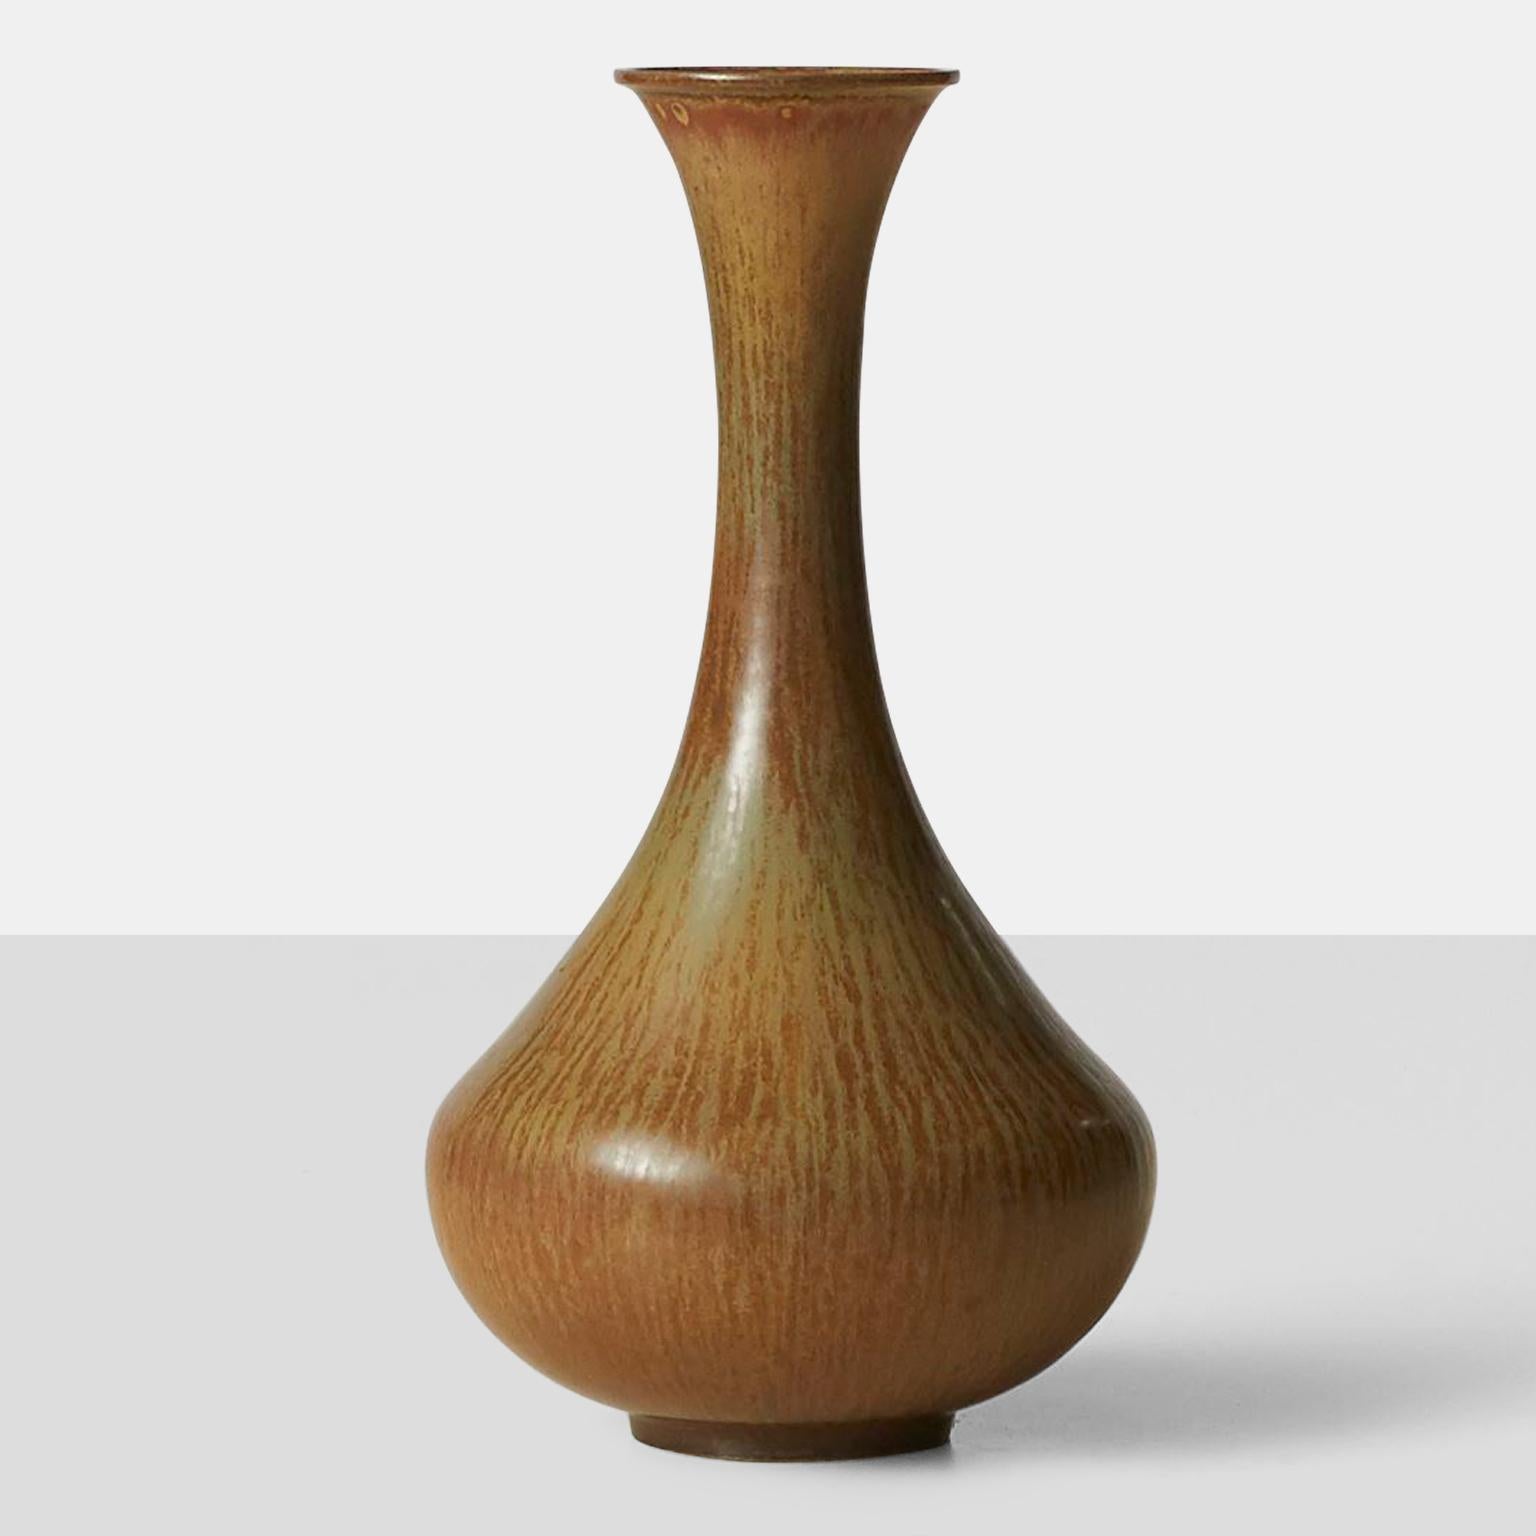 A Gunnar Nylund vase in hare's fur glaze of tans and mossy green. Crafted by Rorstrand in the 1960s, and inscribed {R Sweden GN}.